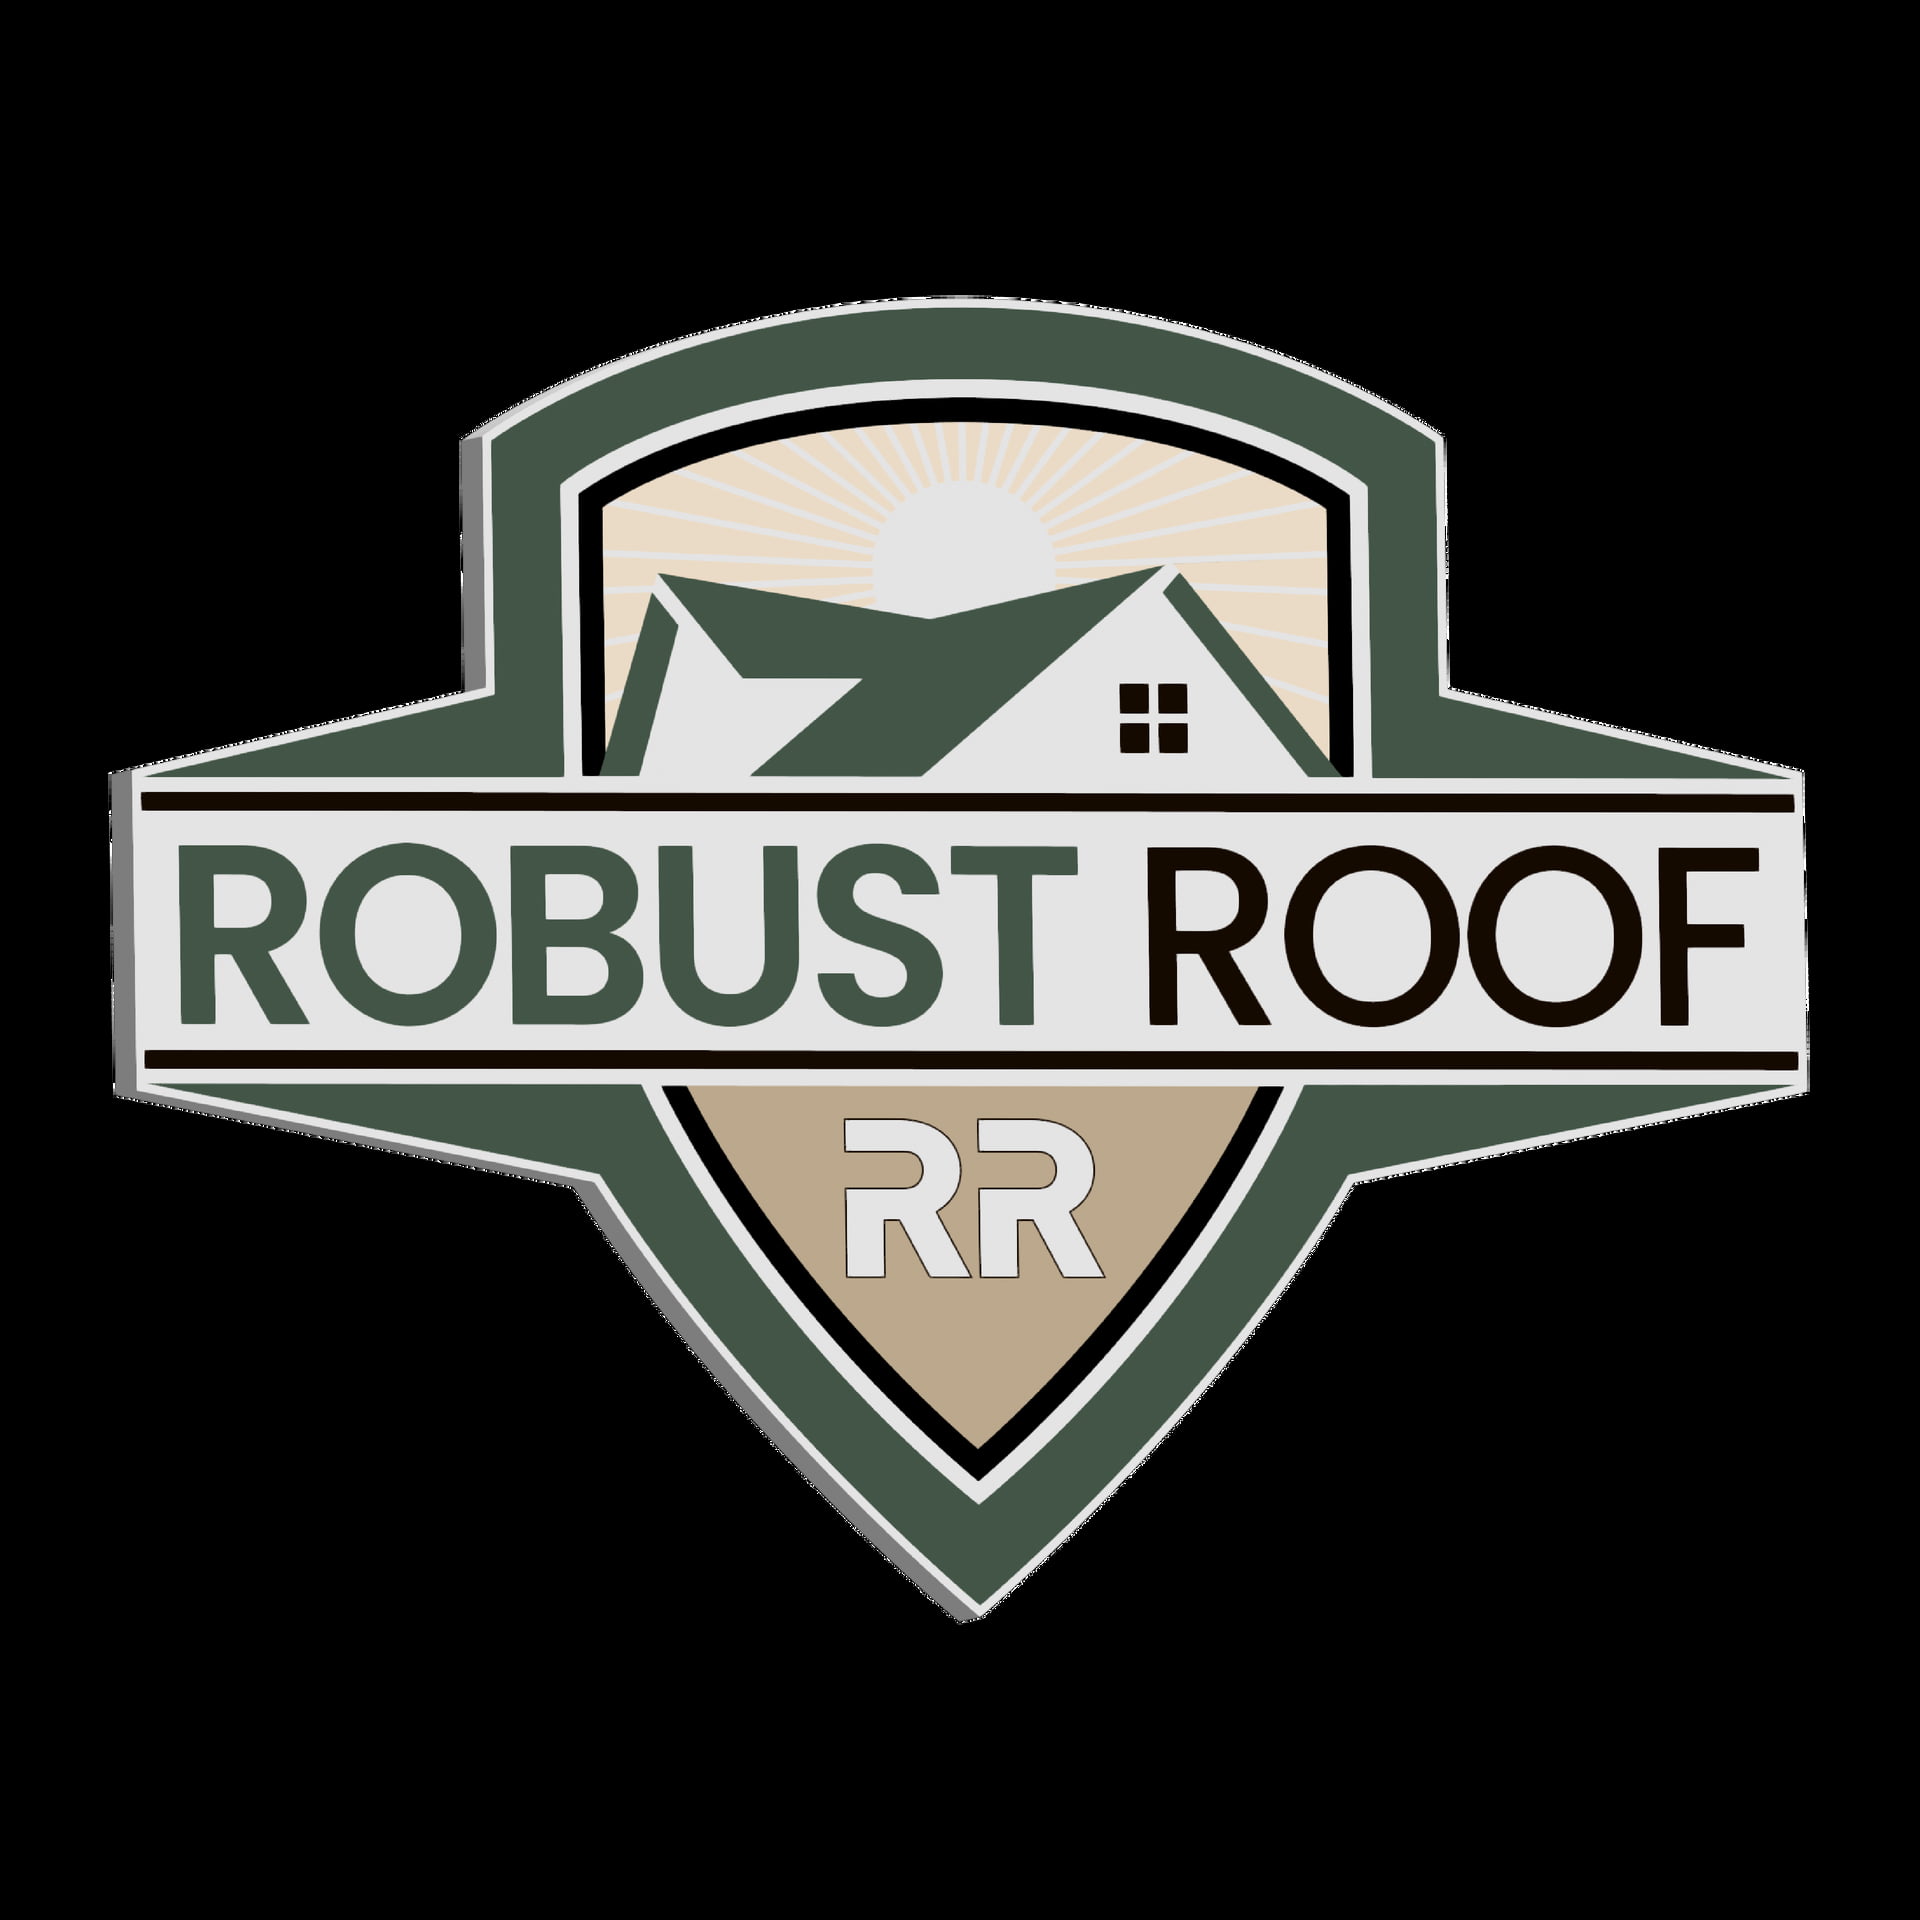 Robust Roof roofing company in Virginia